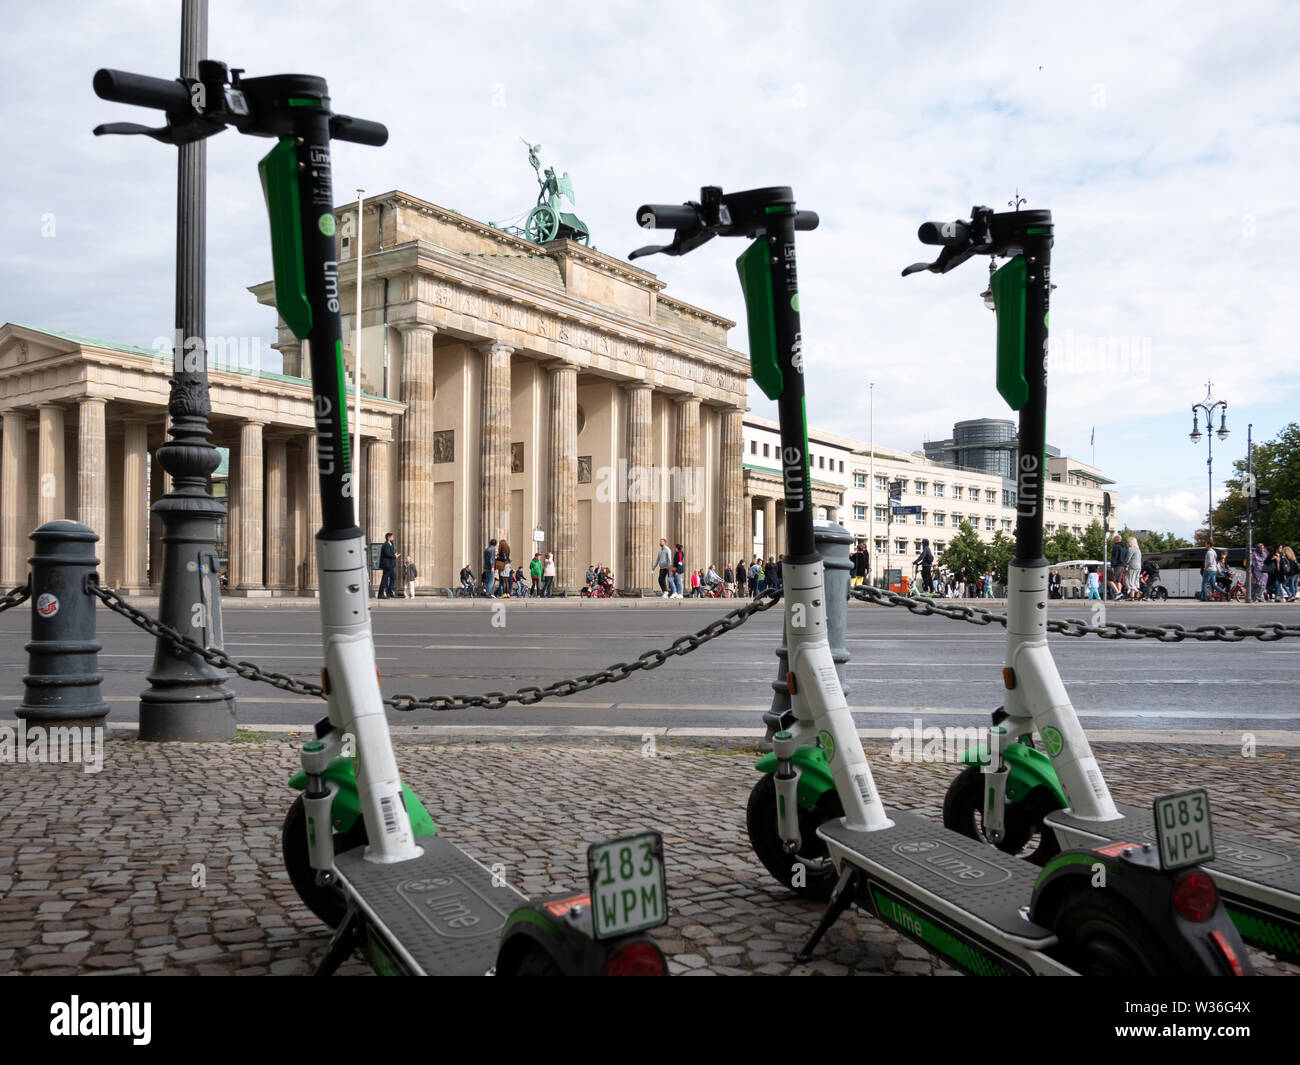 BERLIN, GERMANY - JULY 8, 2019: Motorized Electric Scooters At Brandenburg Gate In Berlin, Germany In Summer Stock Photo